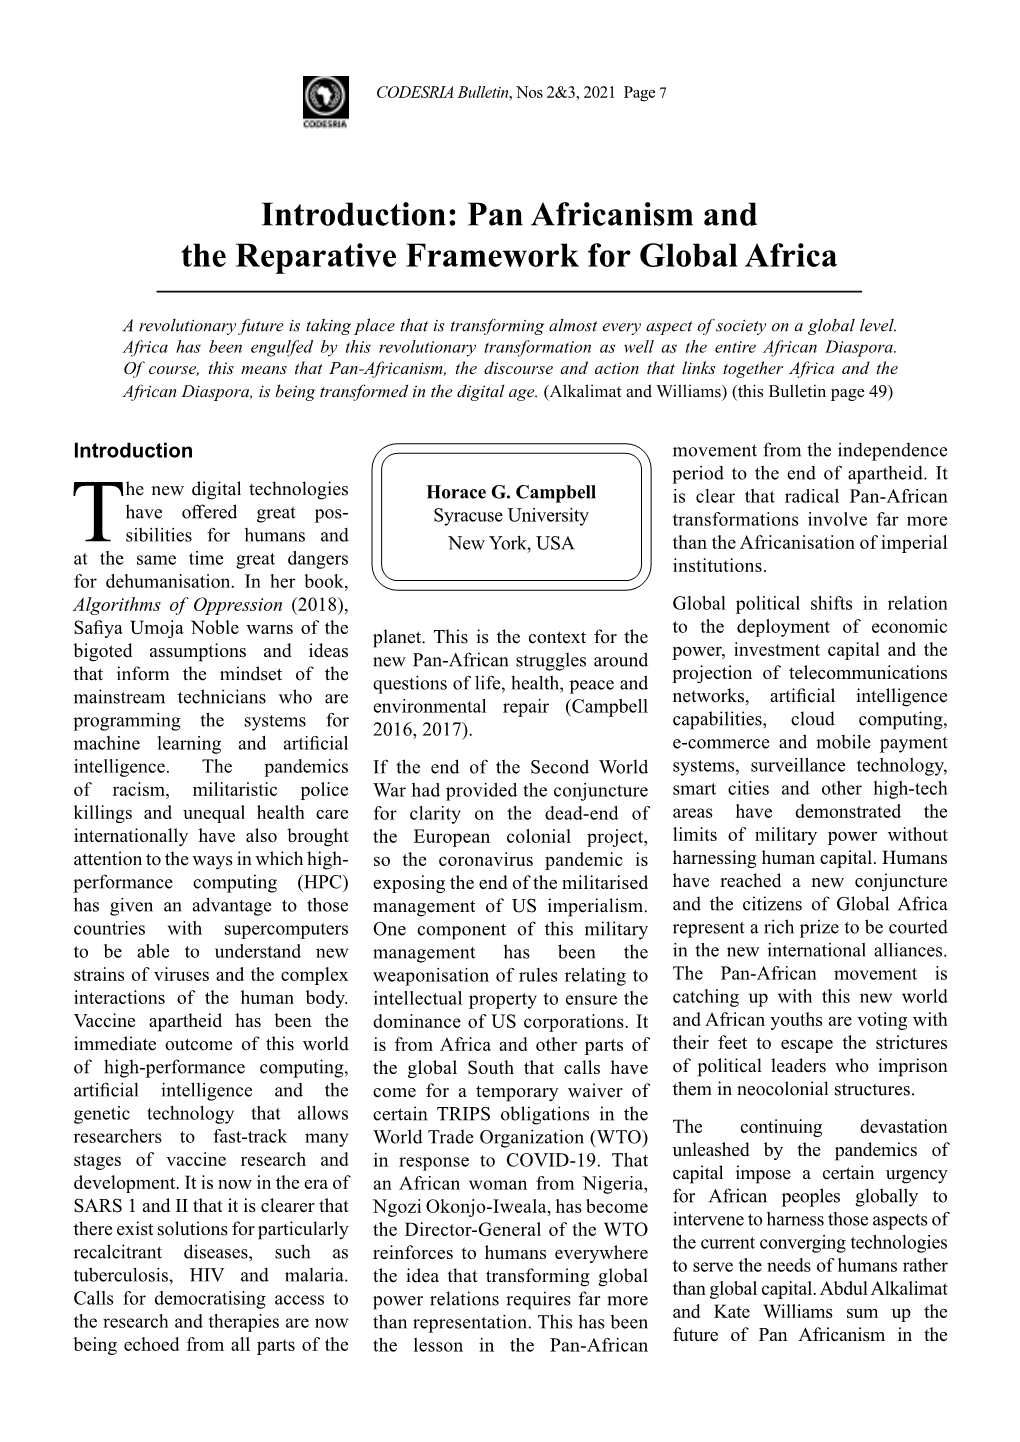 Pan Africanism and the Reparative Framework for Global Africa